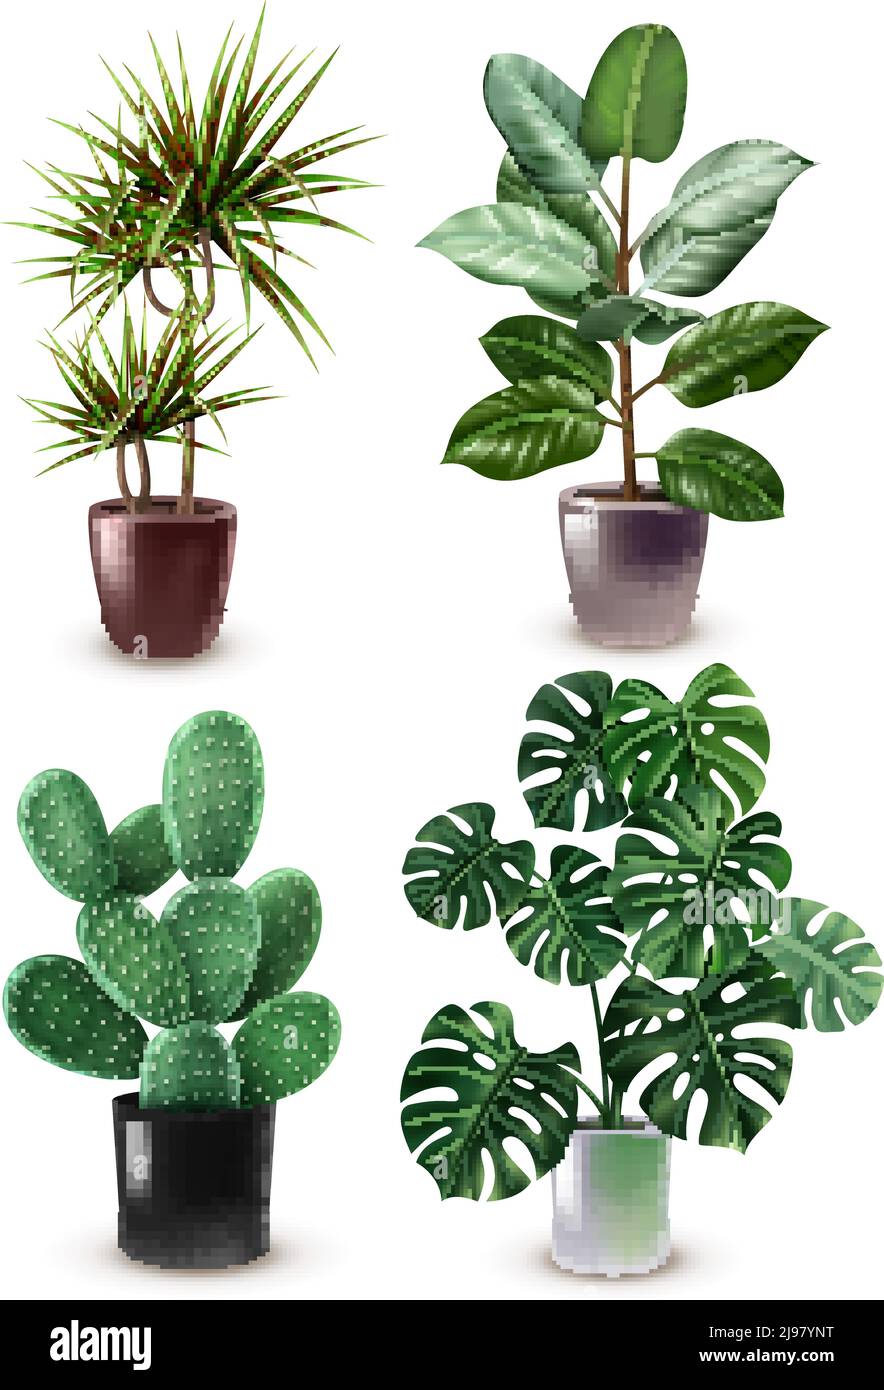 All types of plants Cut Out Stock Images & Pictures - Alamy